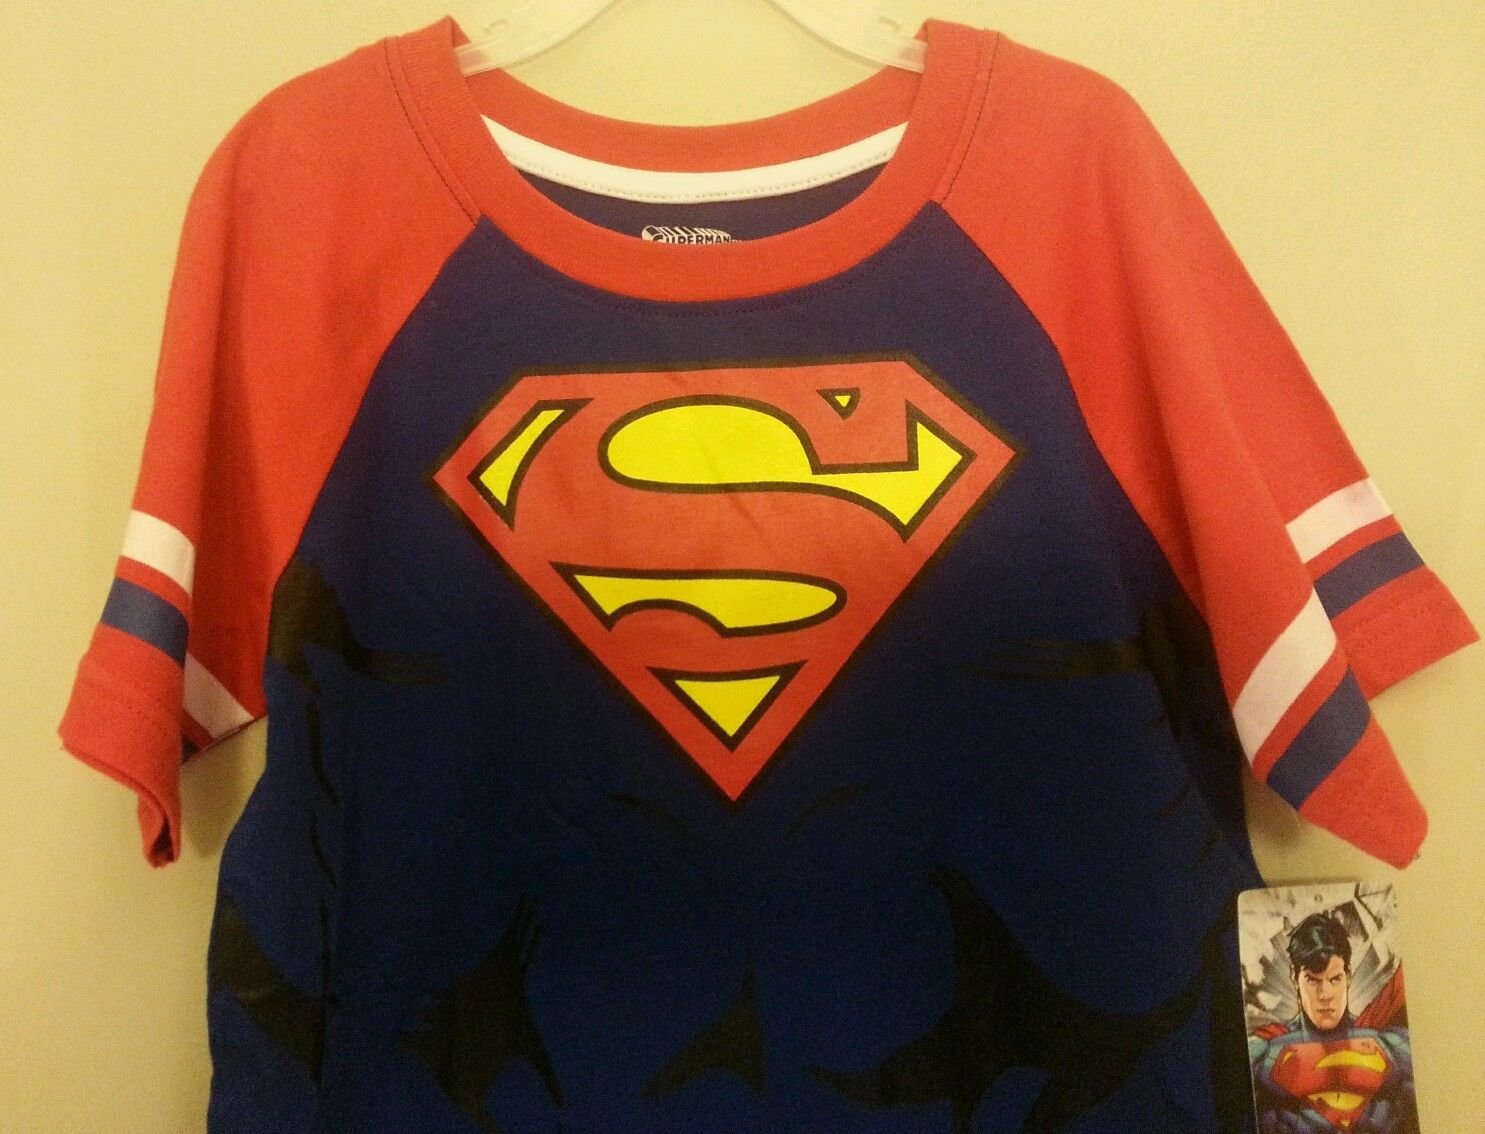 NWT Boys Size 7 Superman Six Pack Abs and Belt style Shirt